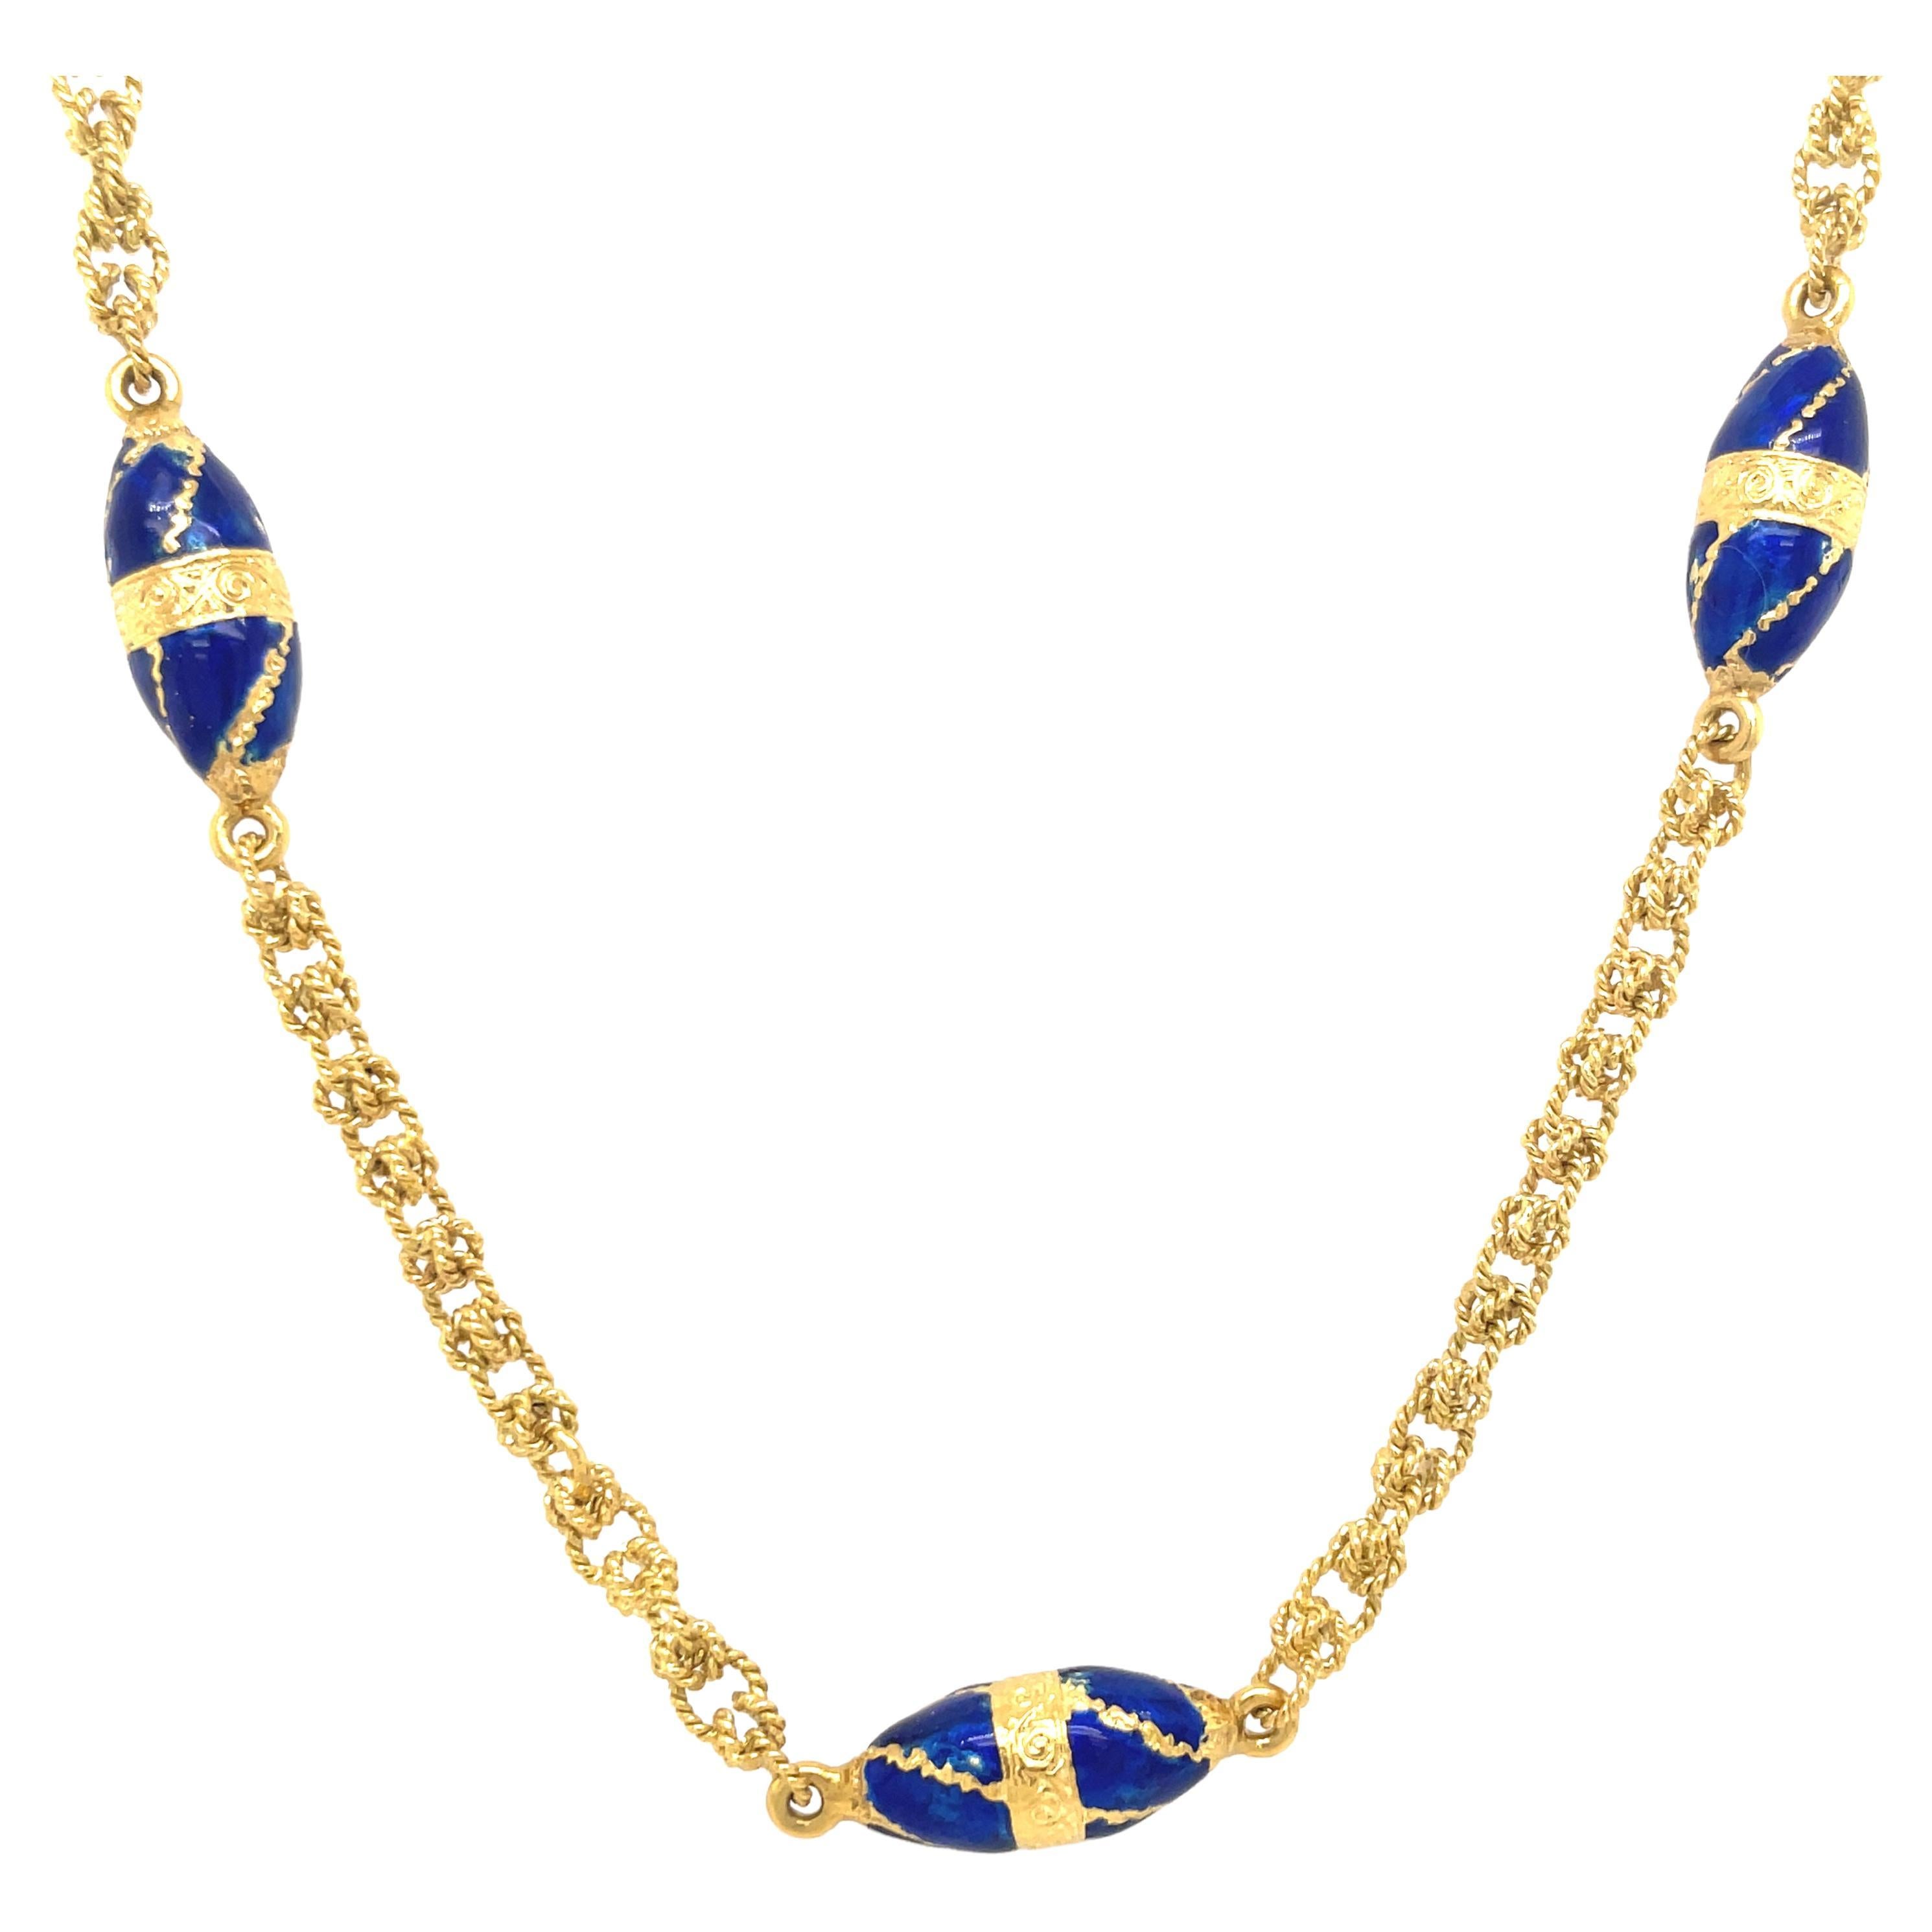 Beautiful Blue Enamel and Gold Chain For Sale